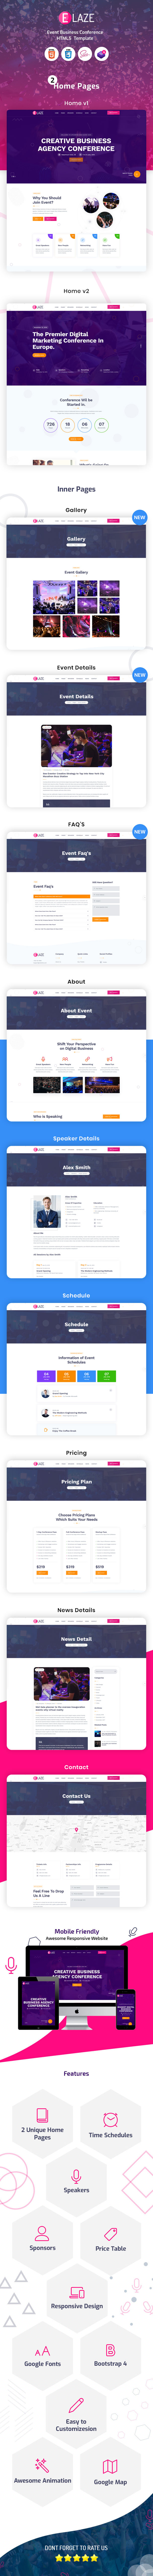 Elaze - Event Business Conference HTML5 Template